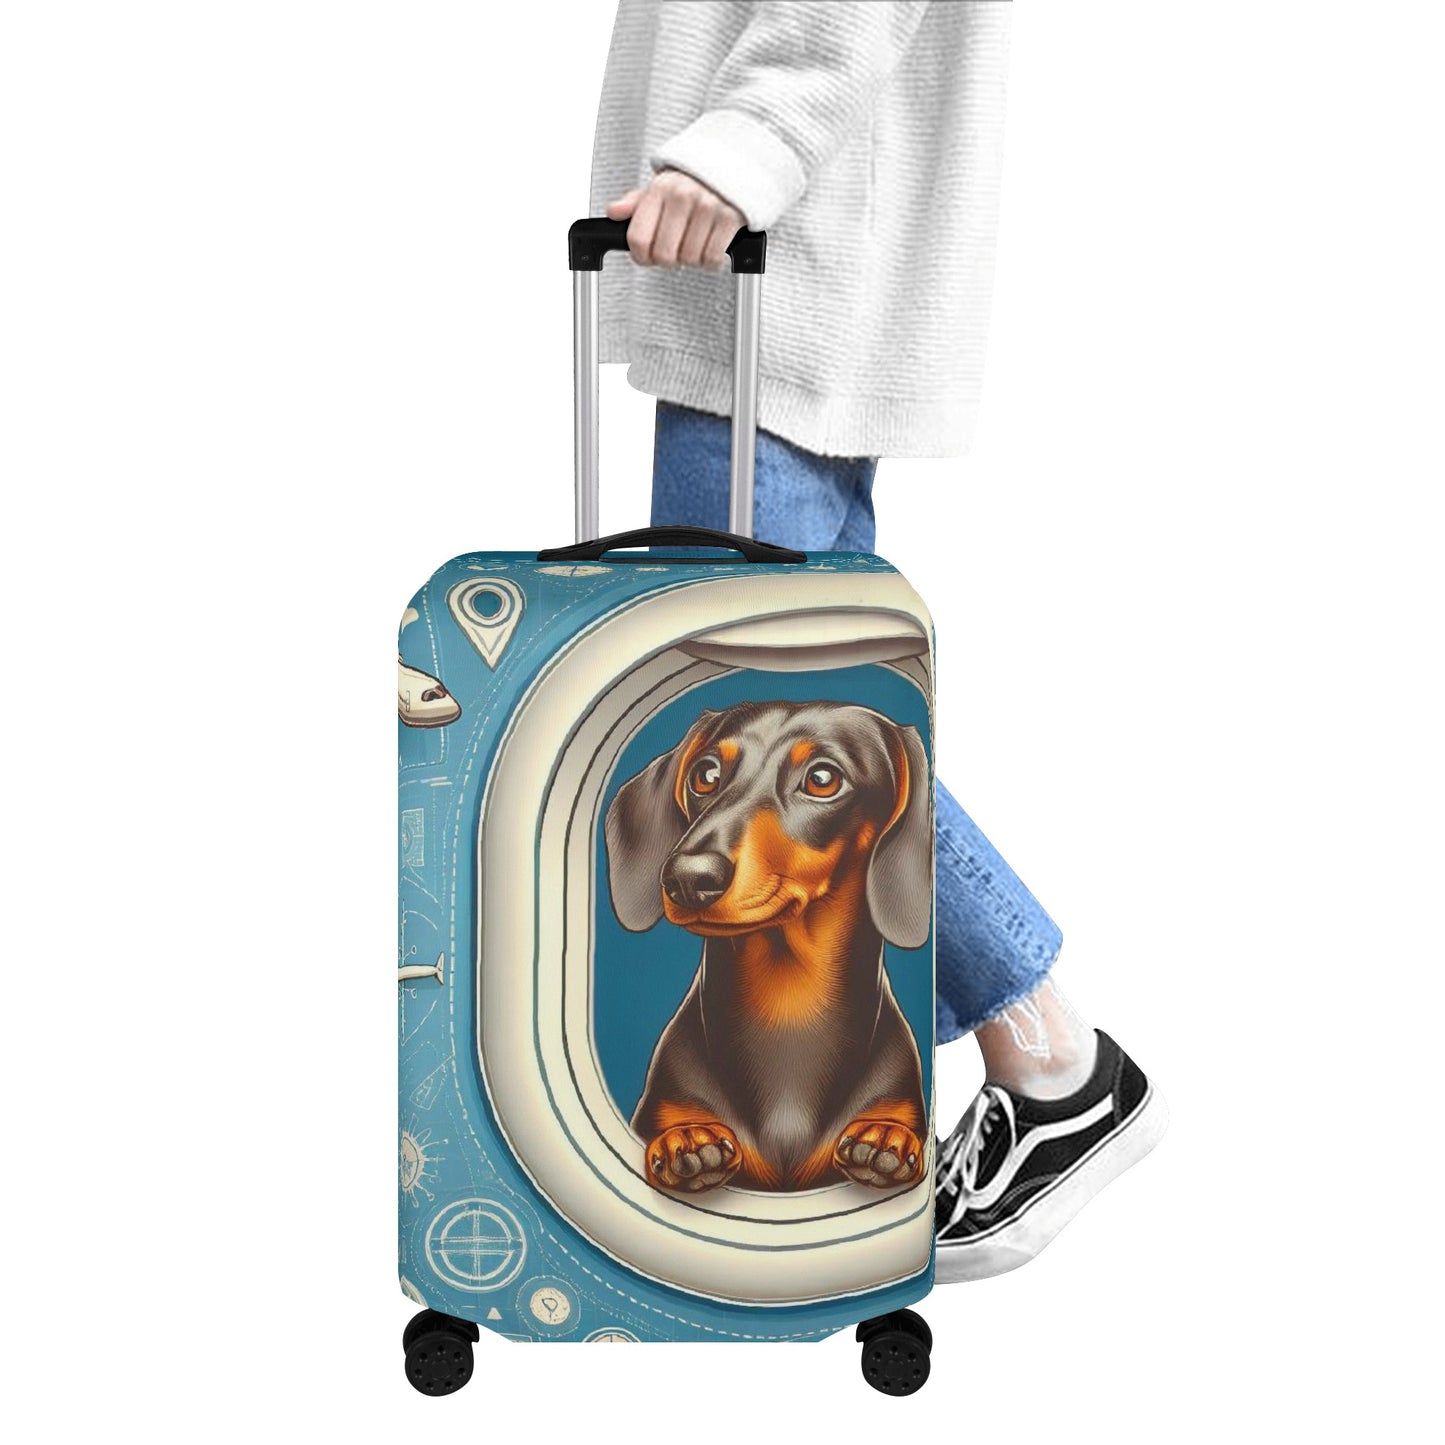 Ivan - Luggage Cover